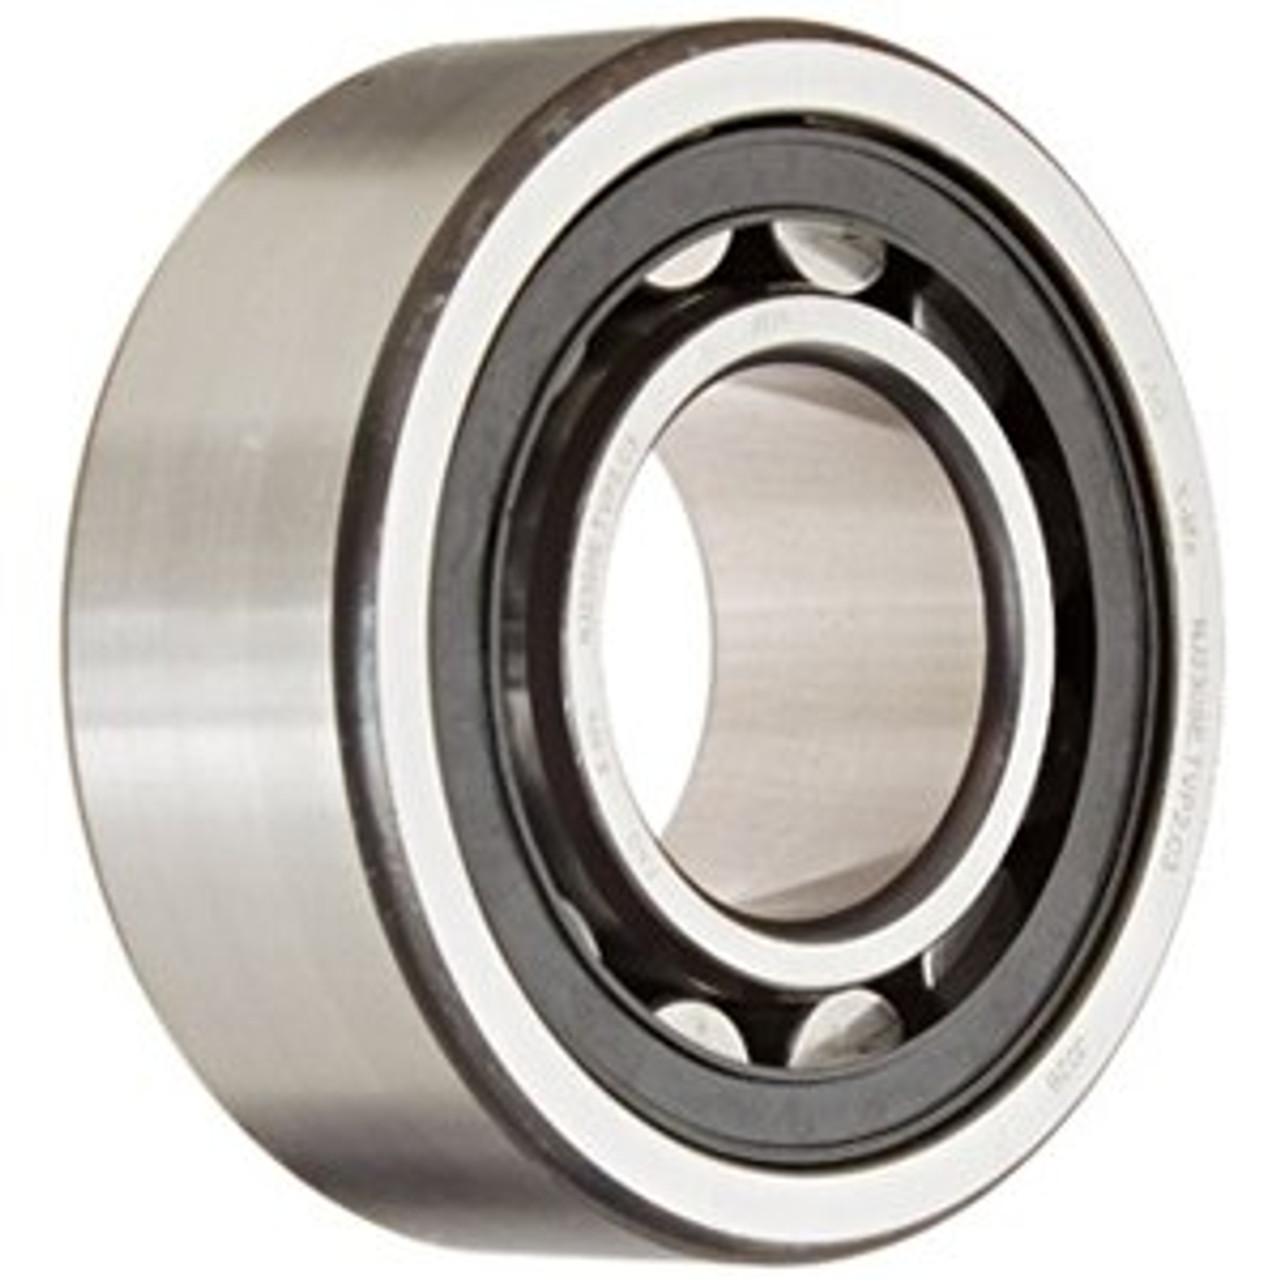 SL04-5005PP2NR INA New Cylindrical Roller Bearing 